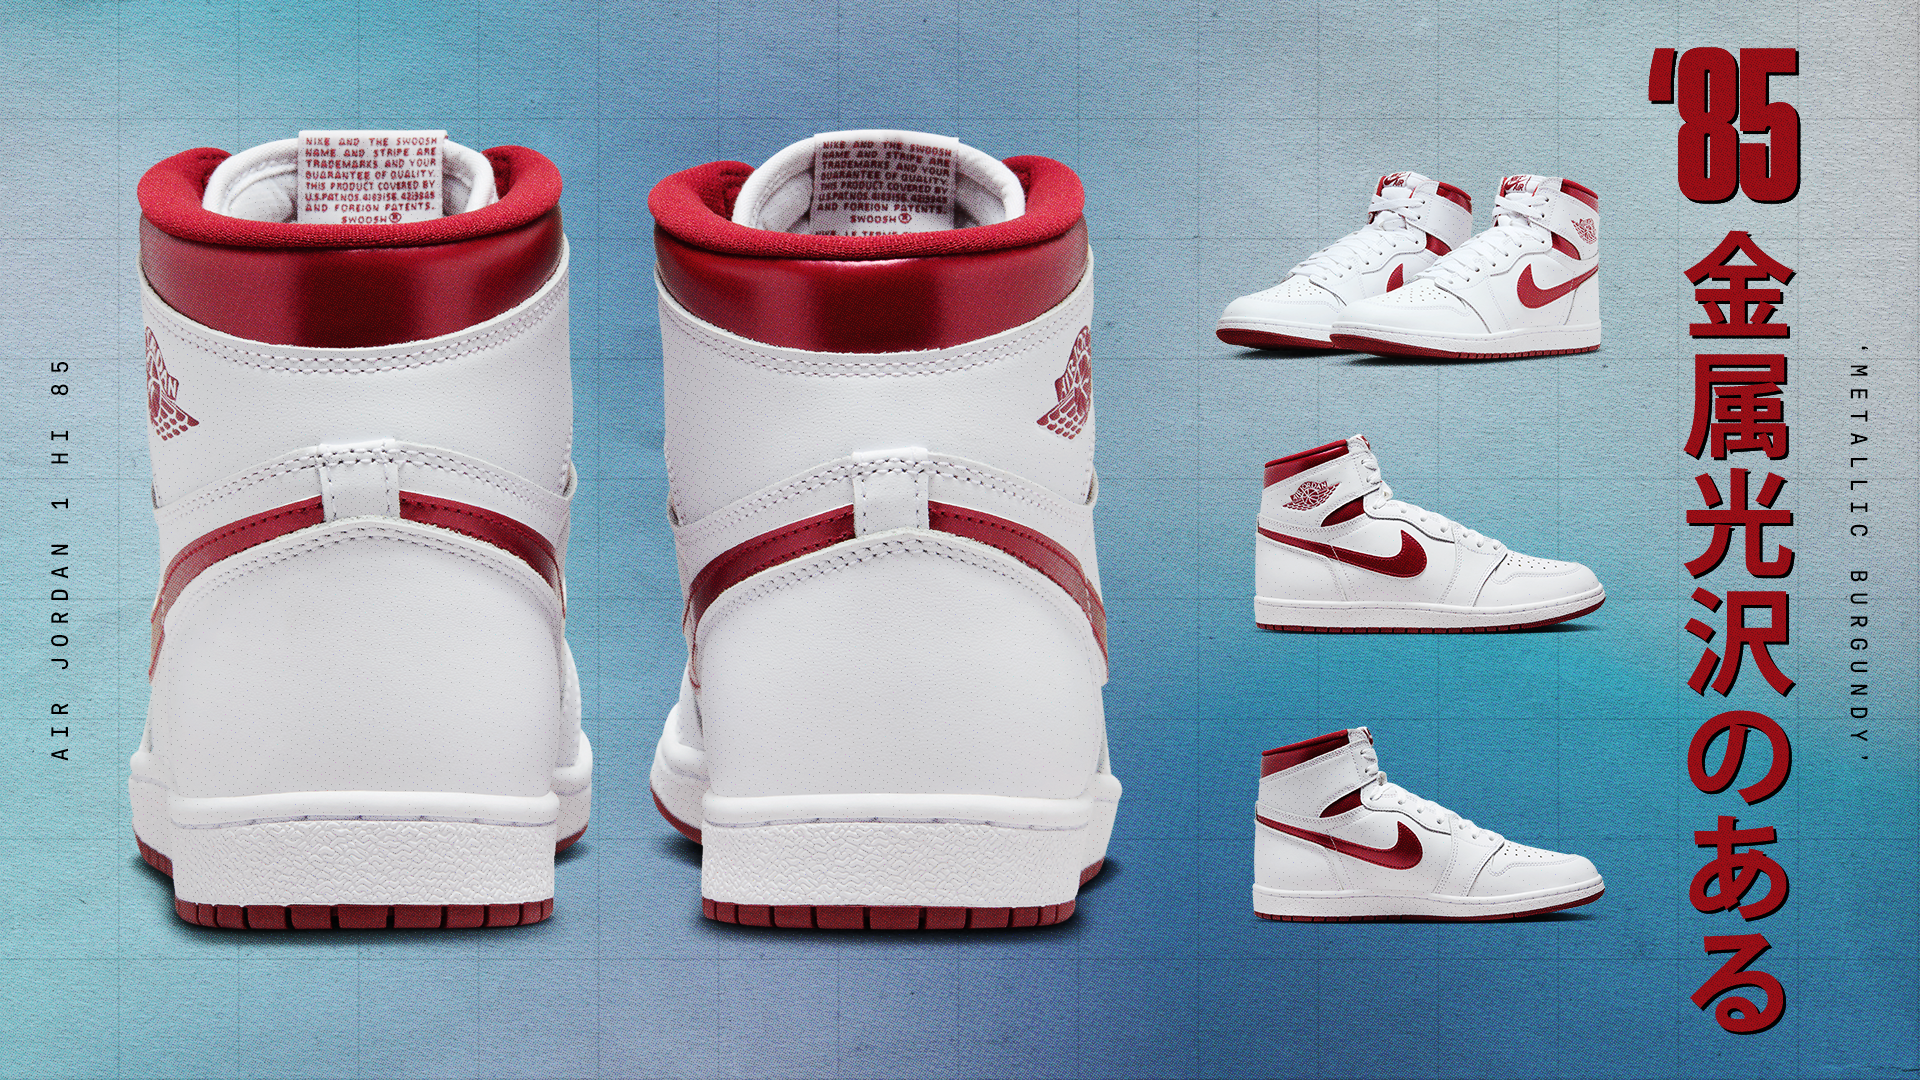 Close-up of Air Jordan 1 Hi &#x27;85 sneakers featuring metallic burgundy accents. The image also includes side views of the sneakers and Japanese text